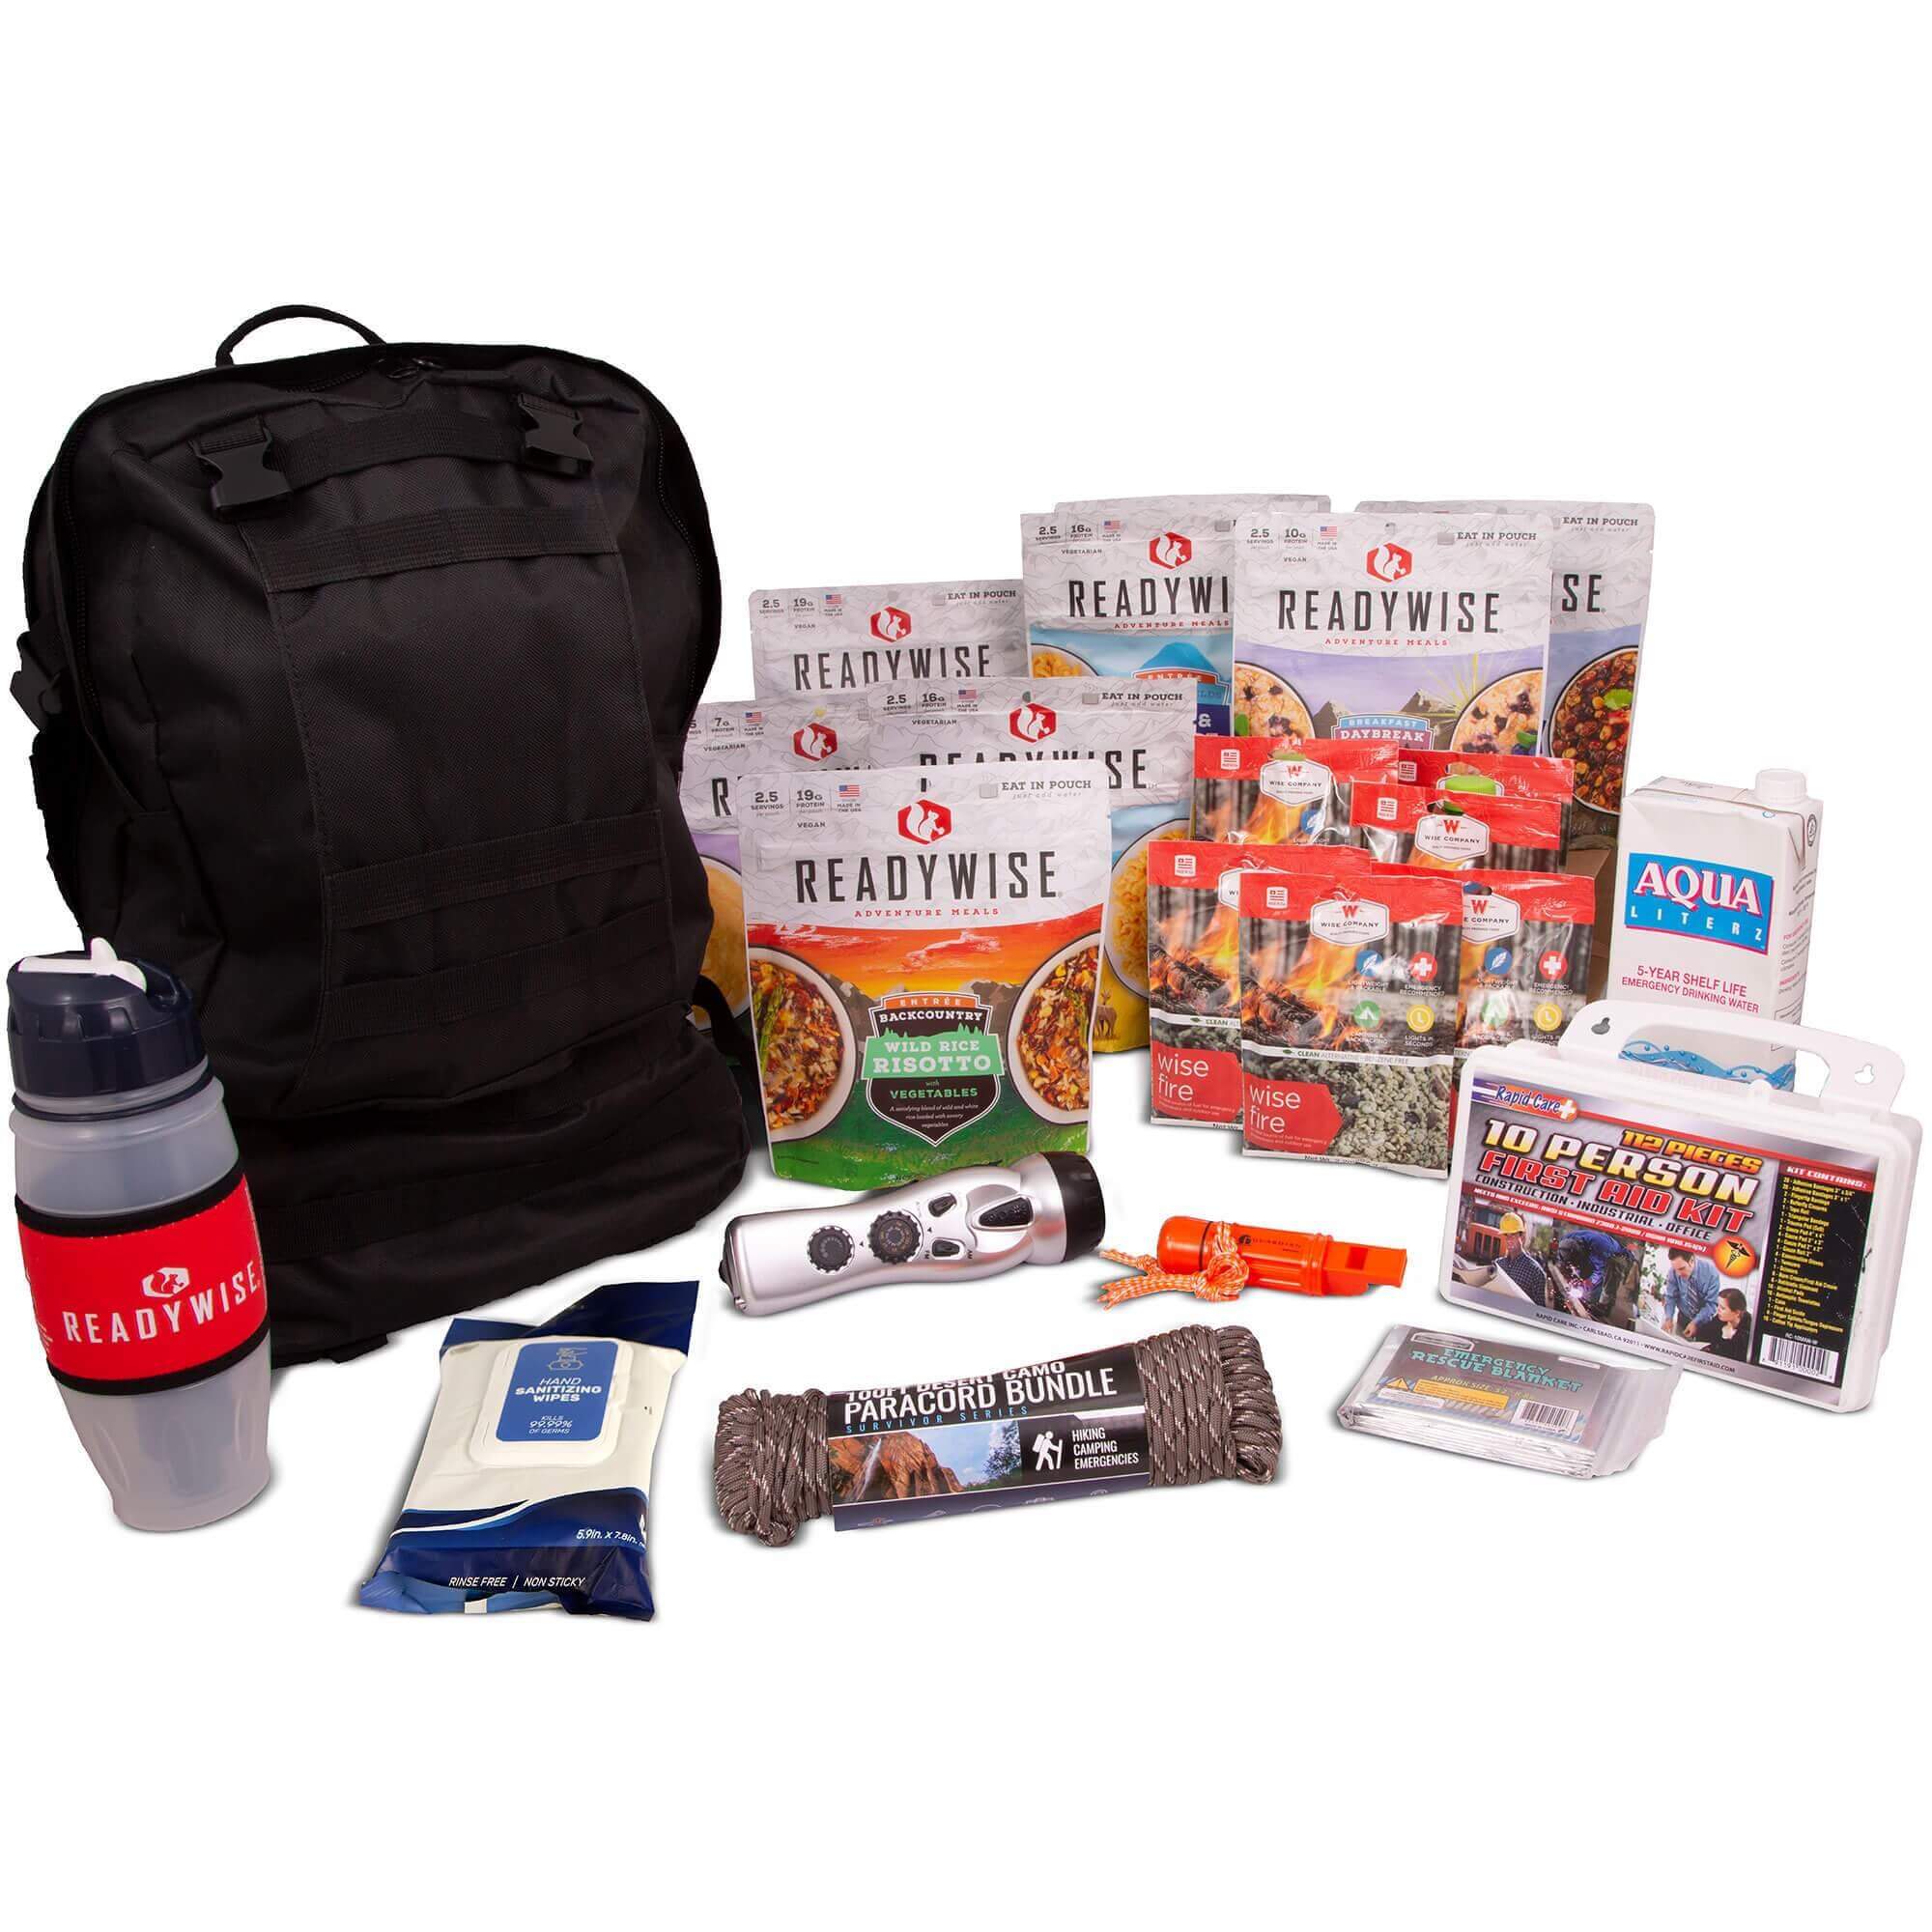 Complete 2-Day Emergency Survival Backpack